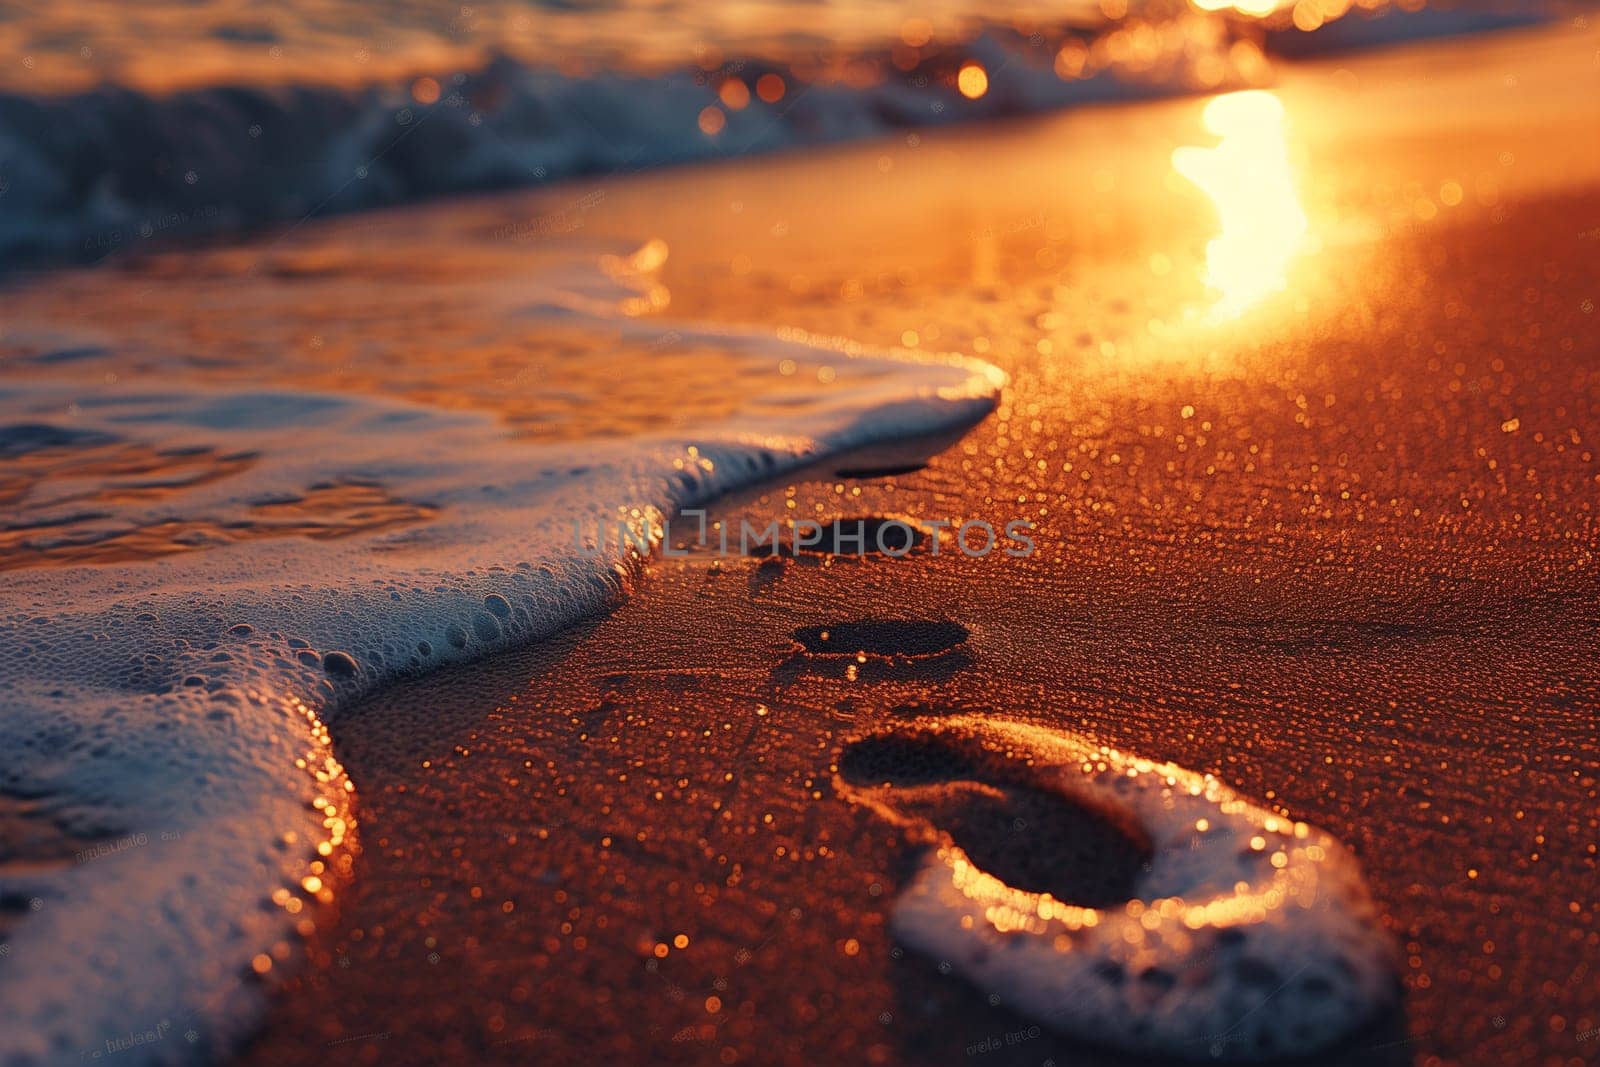 Footprints left behind in the sand on a beach as the sun sets, creating a serene and calming scene.